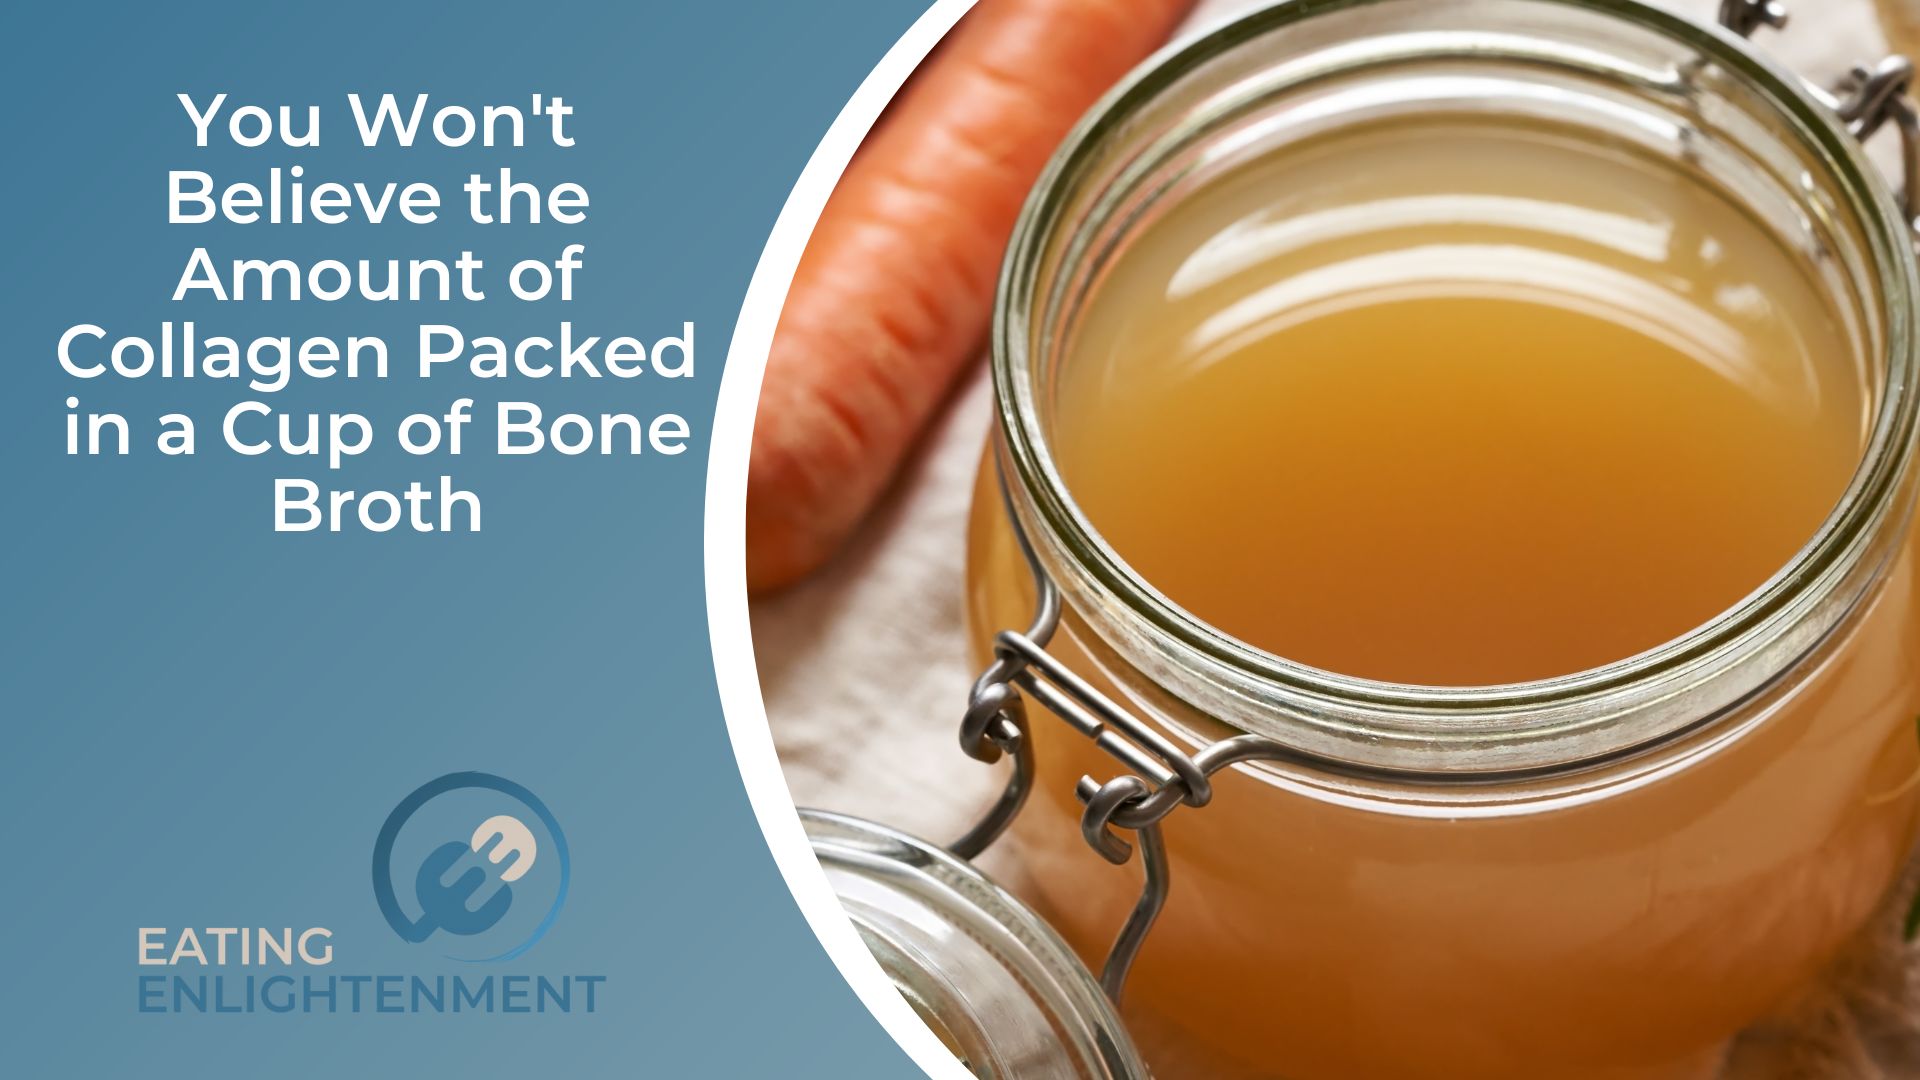 You Won't Believe the Amount of Collagen Packed in a Cup of Bone Broth